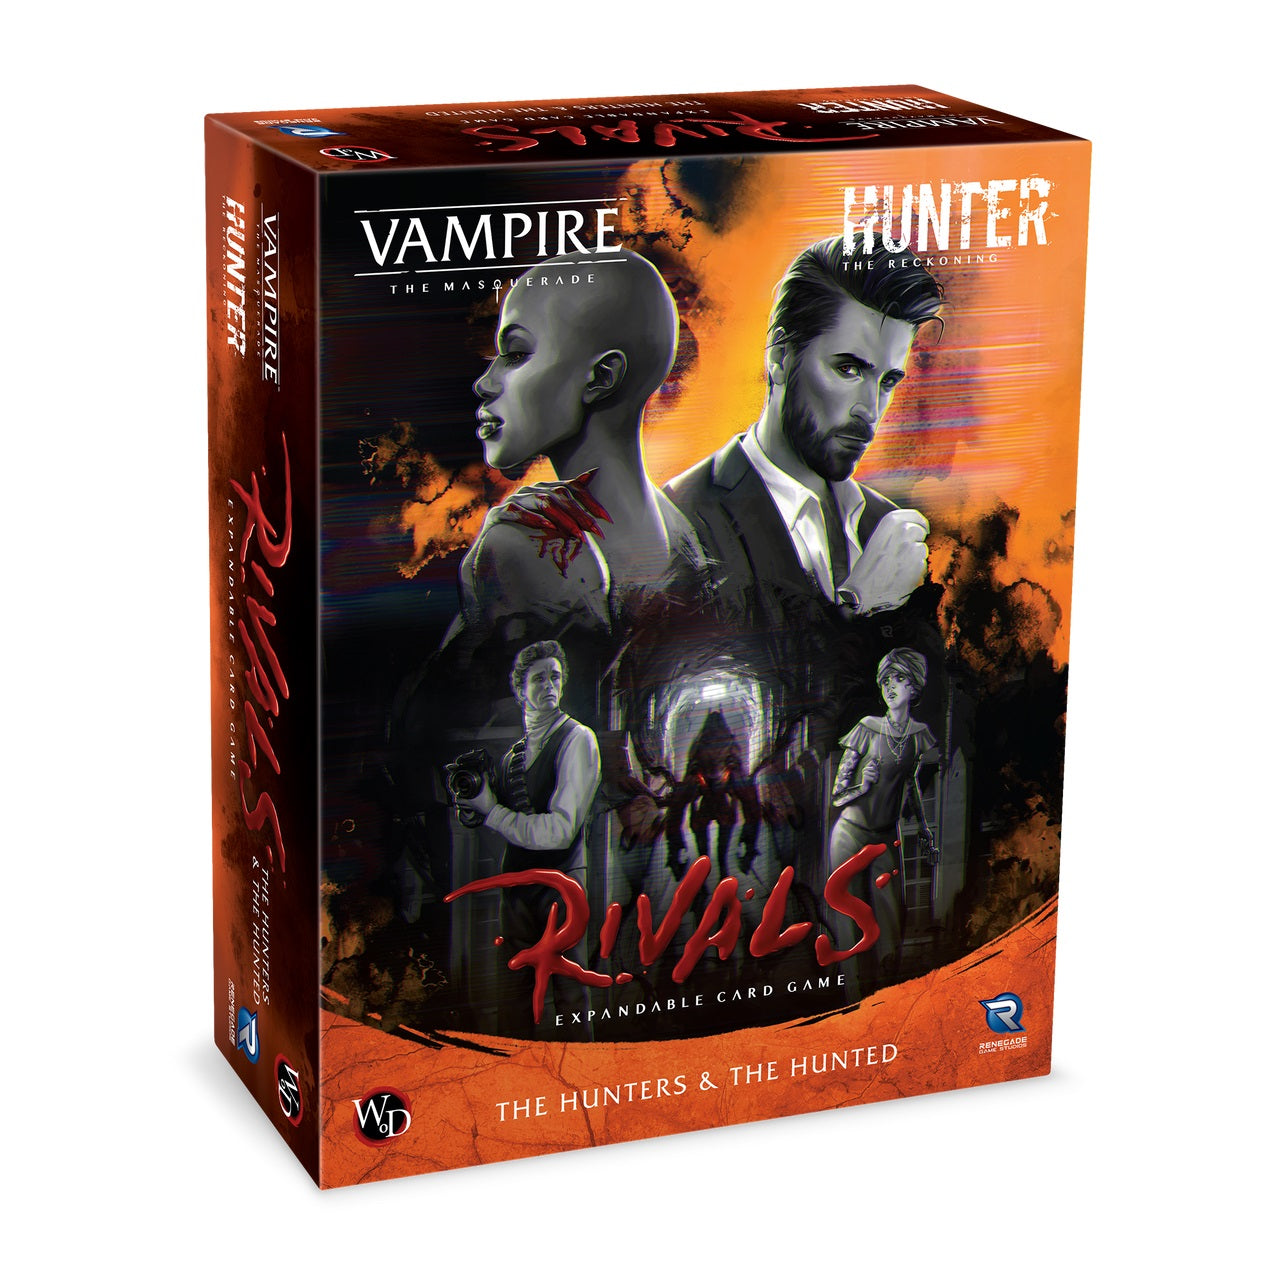 Vampire The Masquerade: Rivals ECG - The Hunters and The Hunted (stand alone or expansion) | Gopher Games